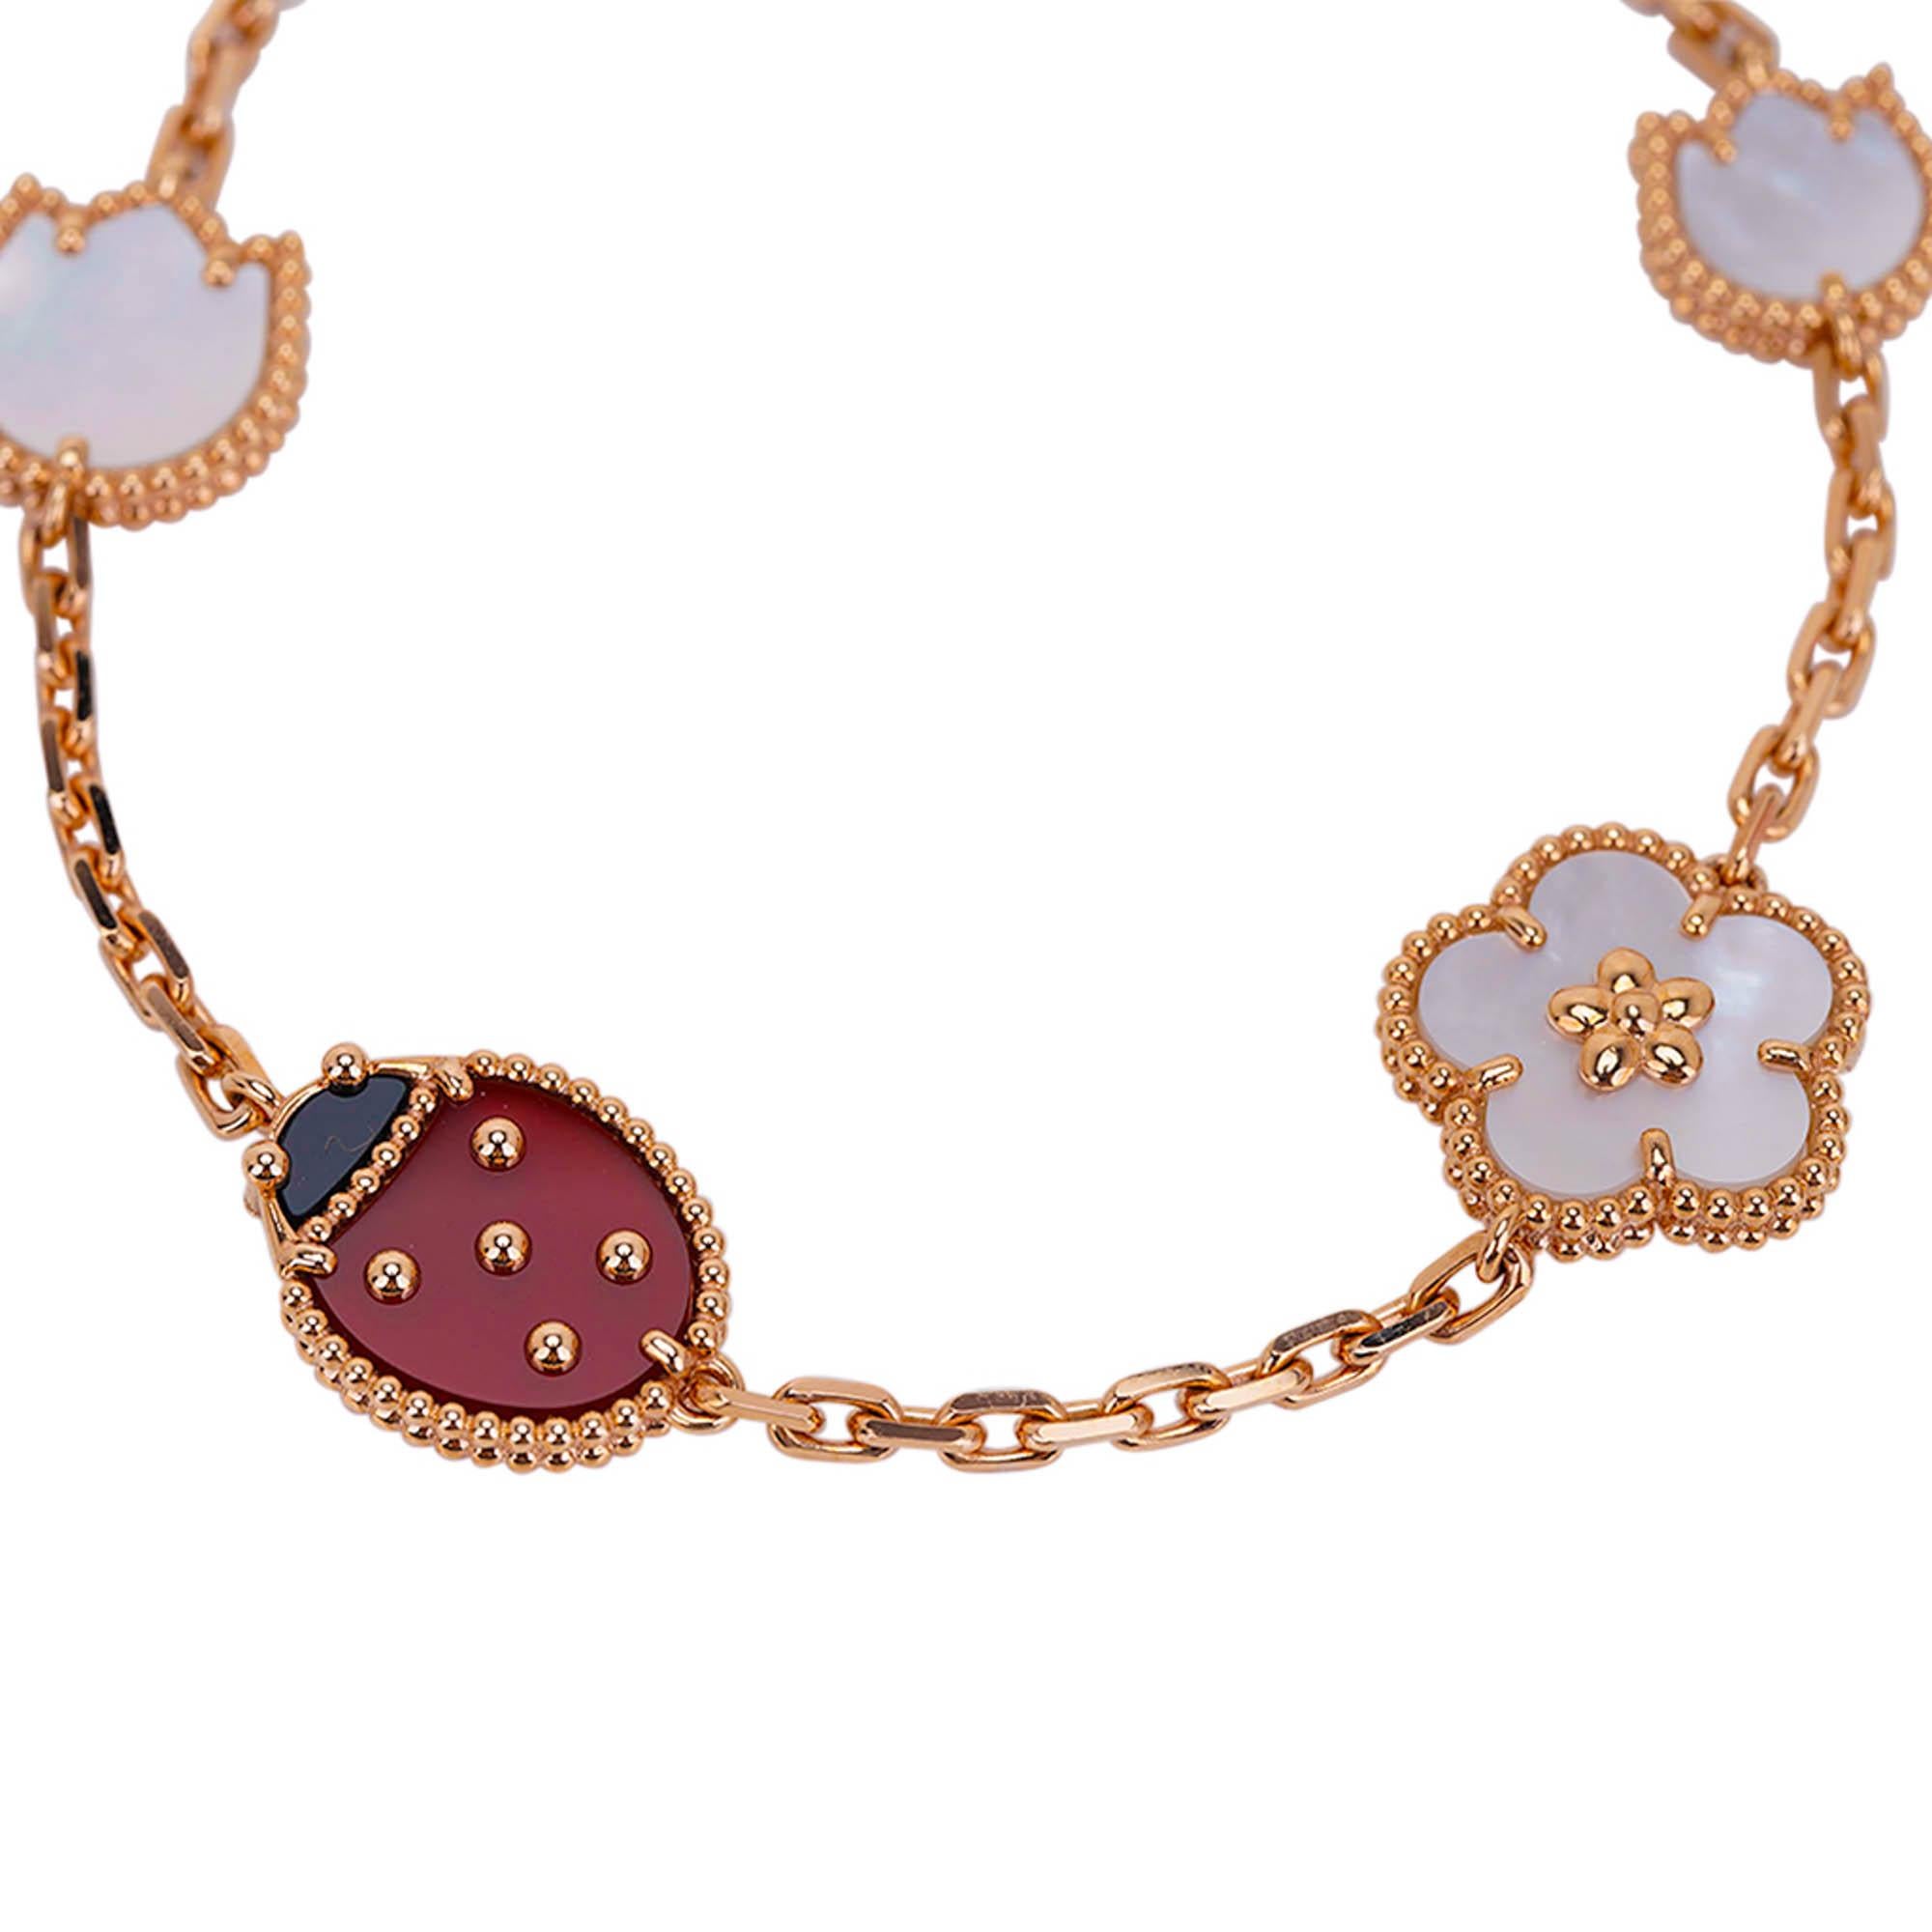 Mightychic offers the collectible Van Cleef & Arpels Lucky Spring long 15 Motifs bracelet.
Happy ladybug, flowers and leaf motifs features the Beauty and Hope of Spring.
Set in 18K Rose Gold with Carnelian, Black Onyx and Mother of Pearl.
Signature